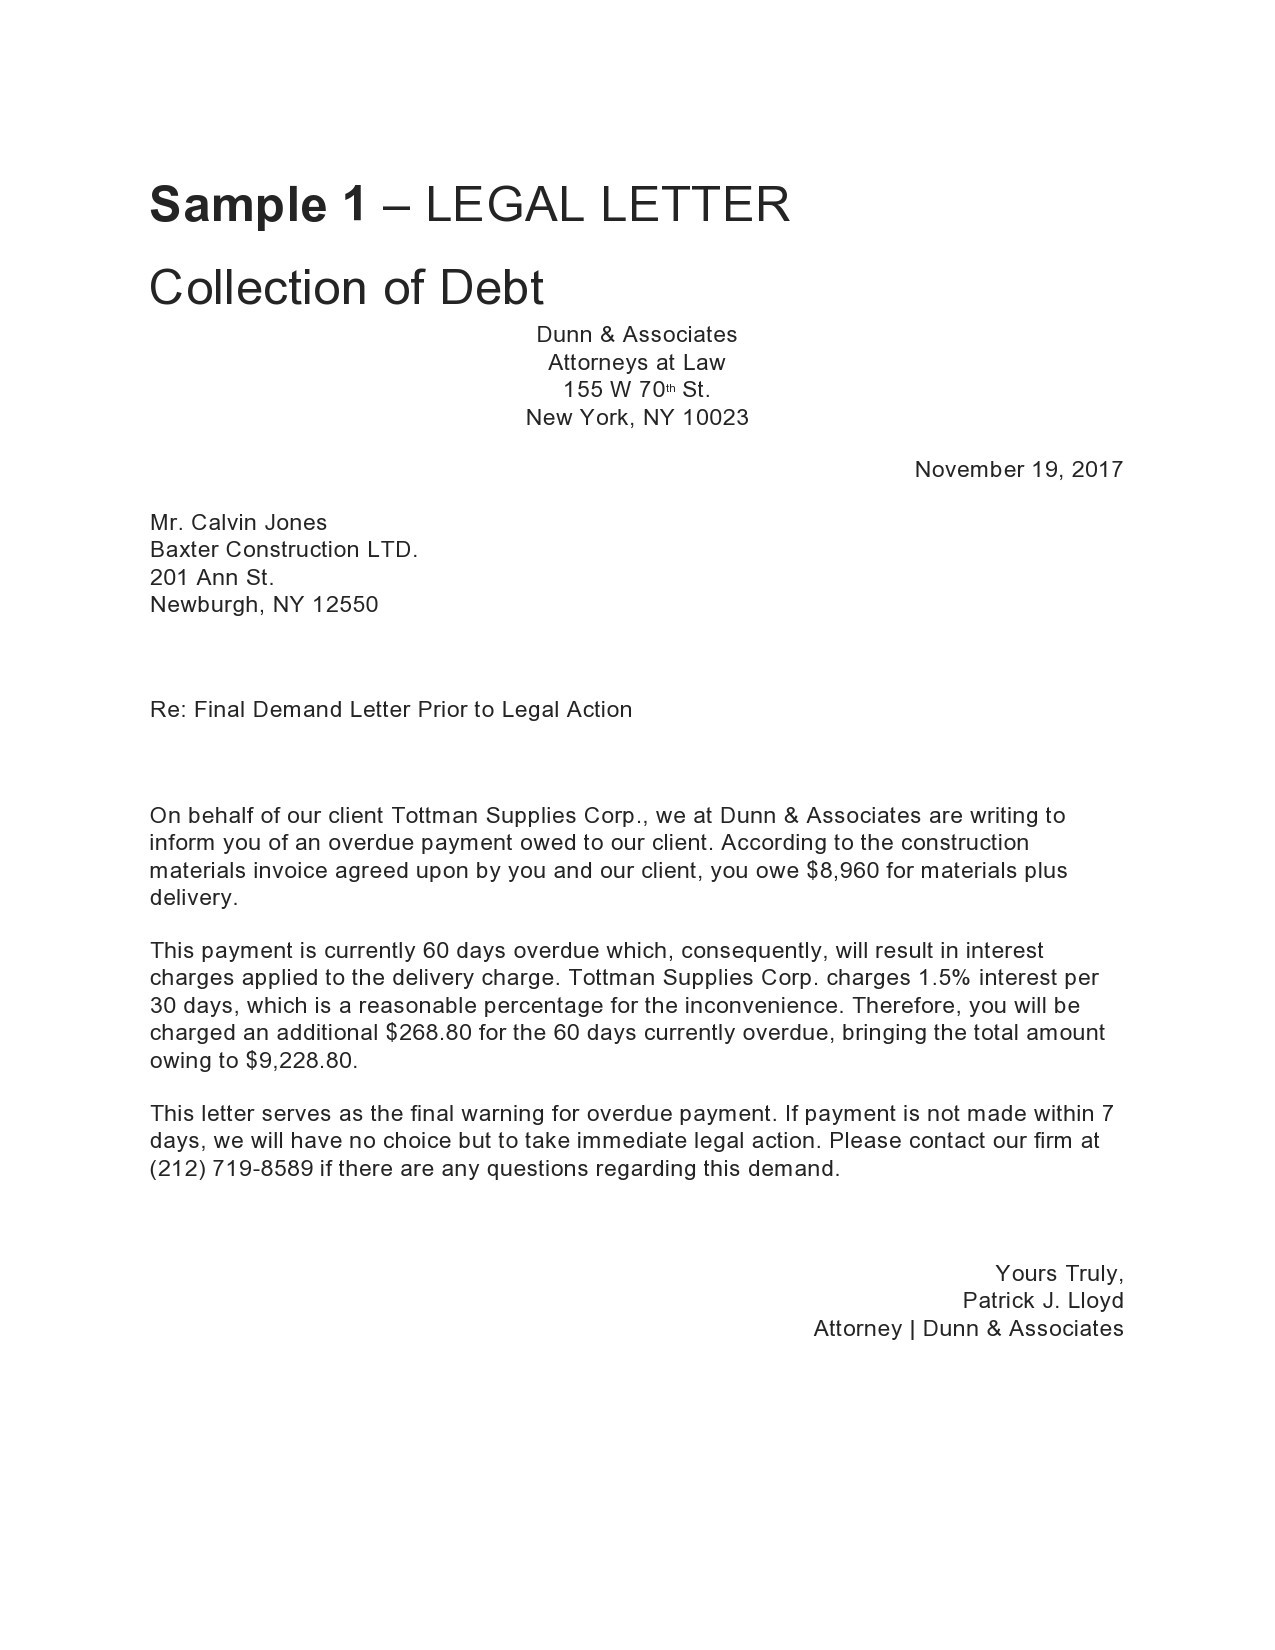 Sample Letter From Attorney To Client from templatelab.com